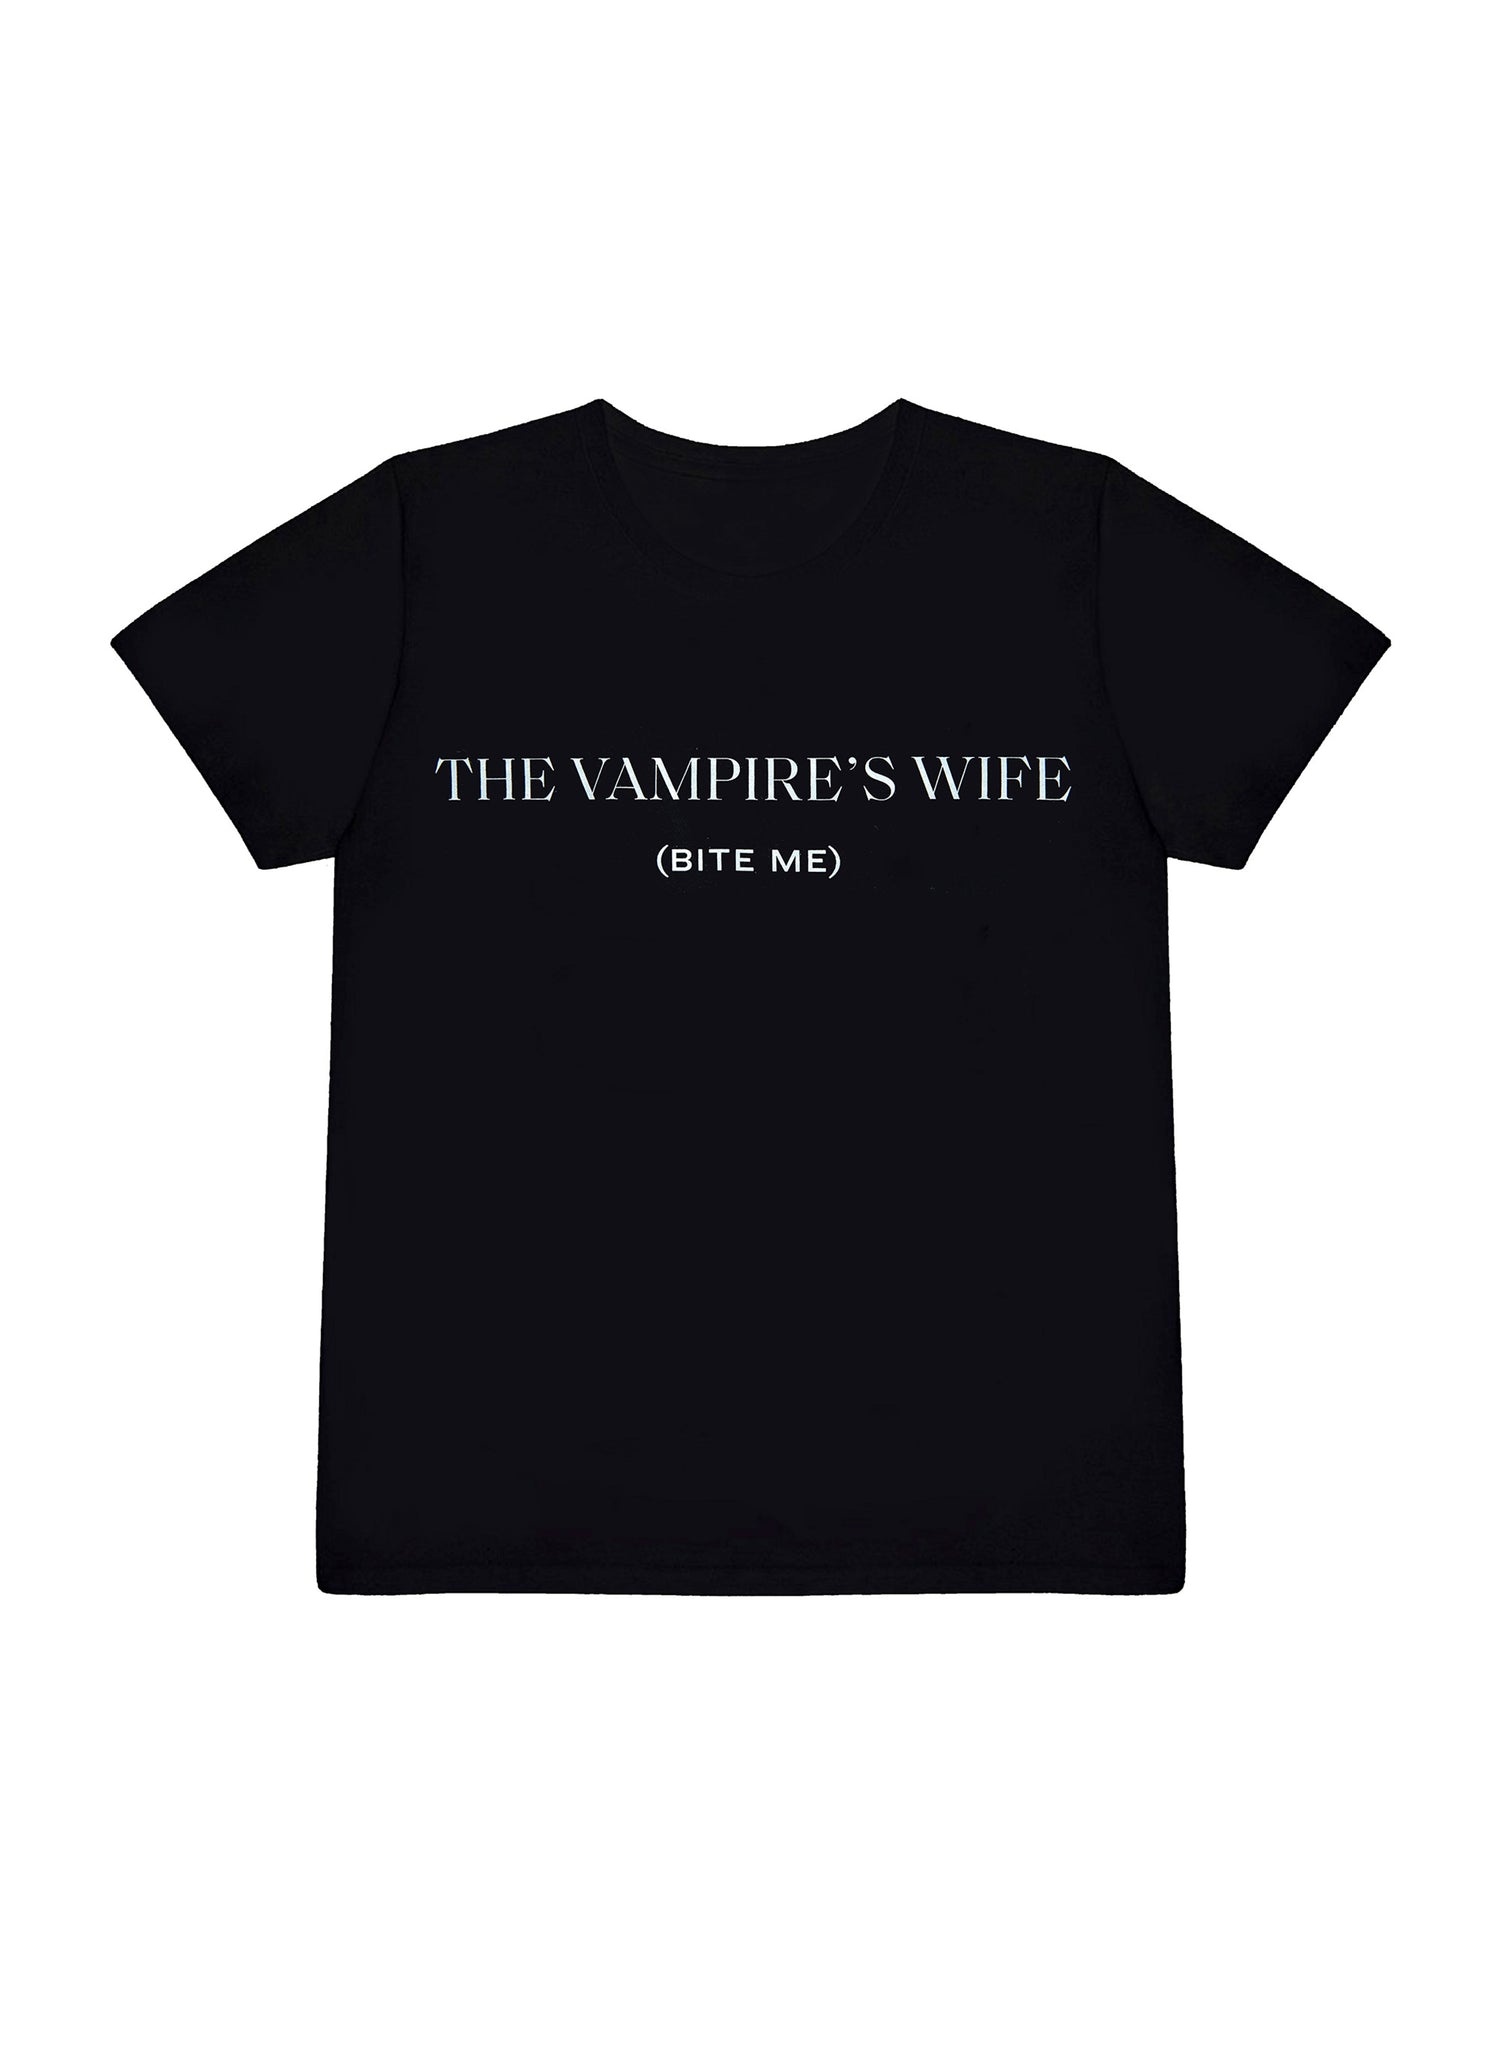 NICK CAVE AND THE BAD SEEDS X THE VAMPIRE'S WIFE 'BITE ME' T SHIRT - 3